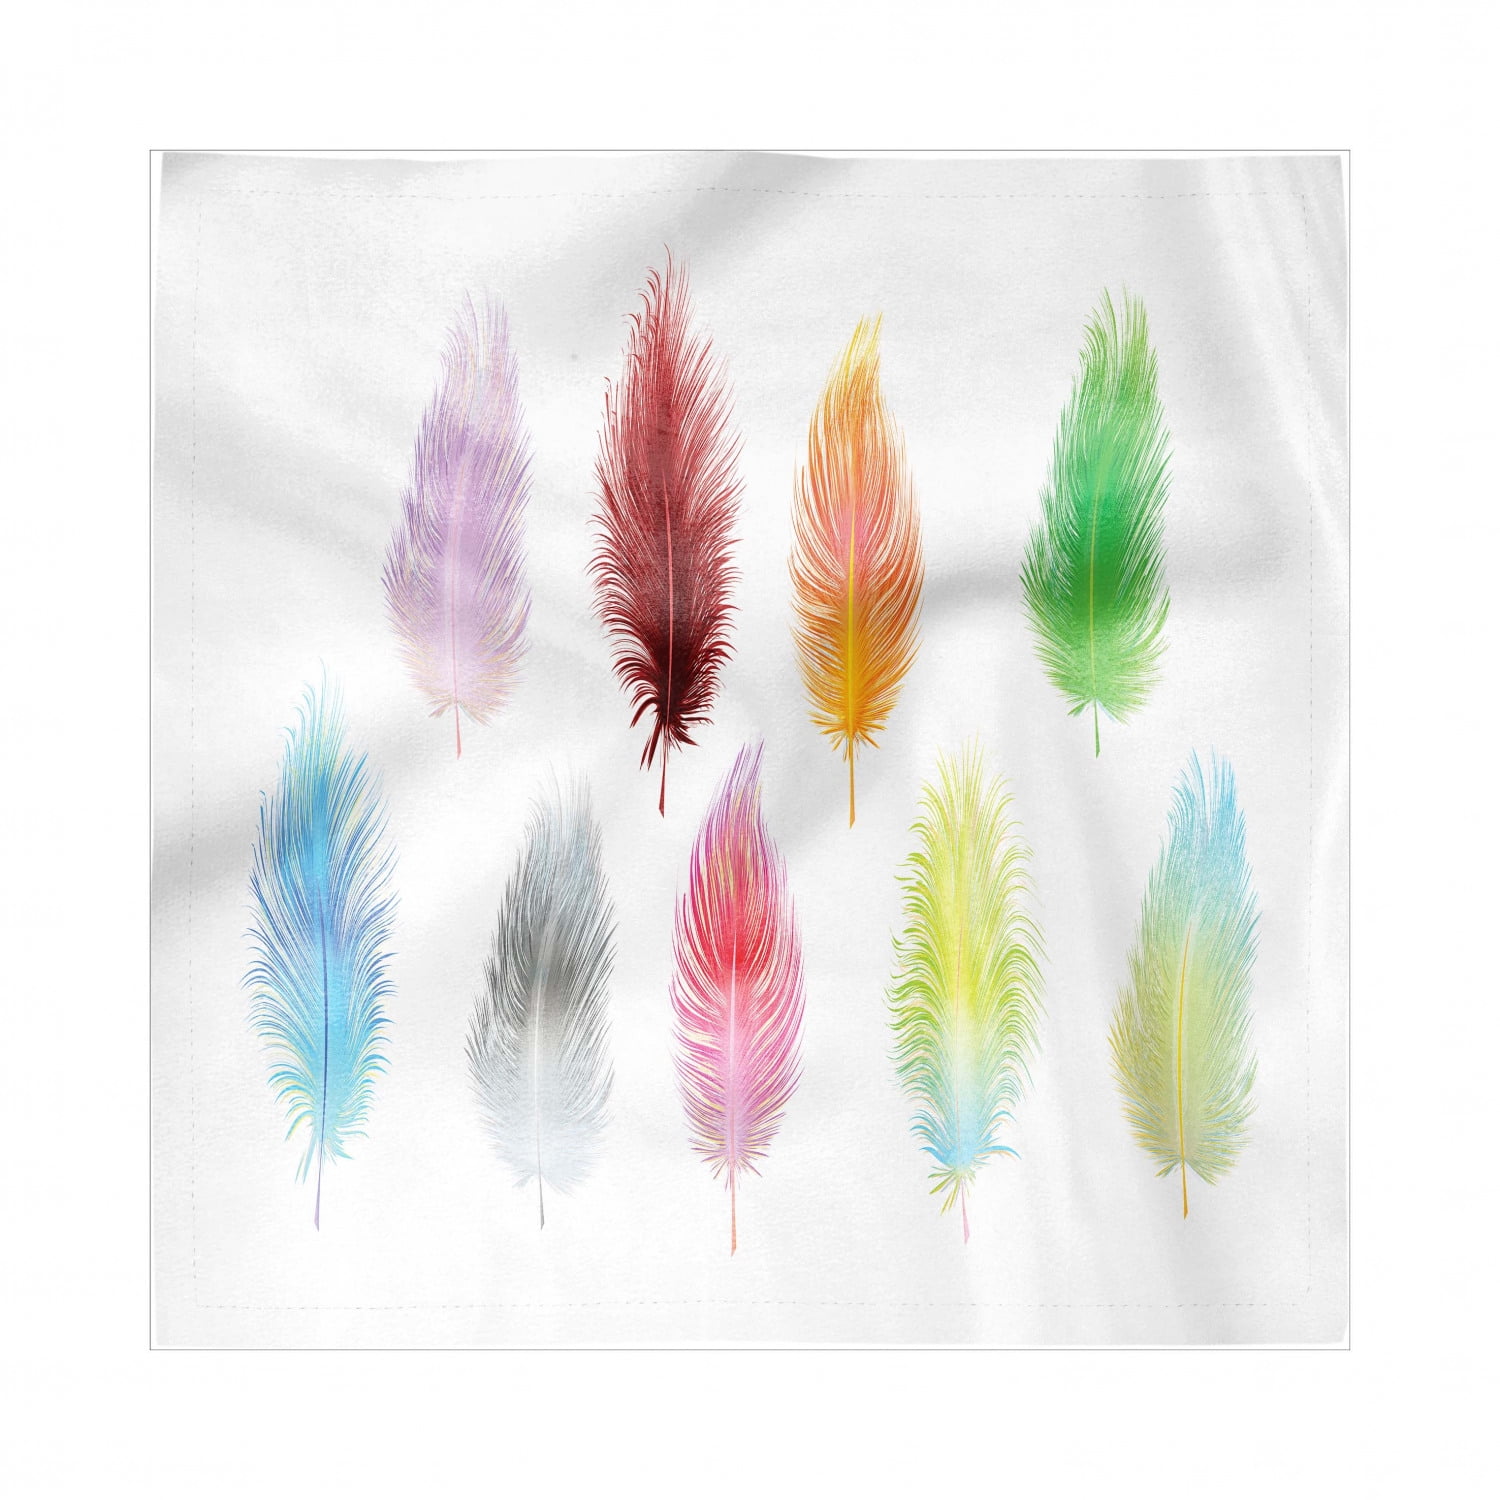 Feather Decorative Satin Napkins Set of 4, Bohemian Collaboration of  Colorful Fluff on a Plain Background Plumage Art Print, Square Fabric Party  & Dinner Napkin, 12